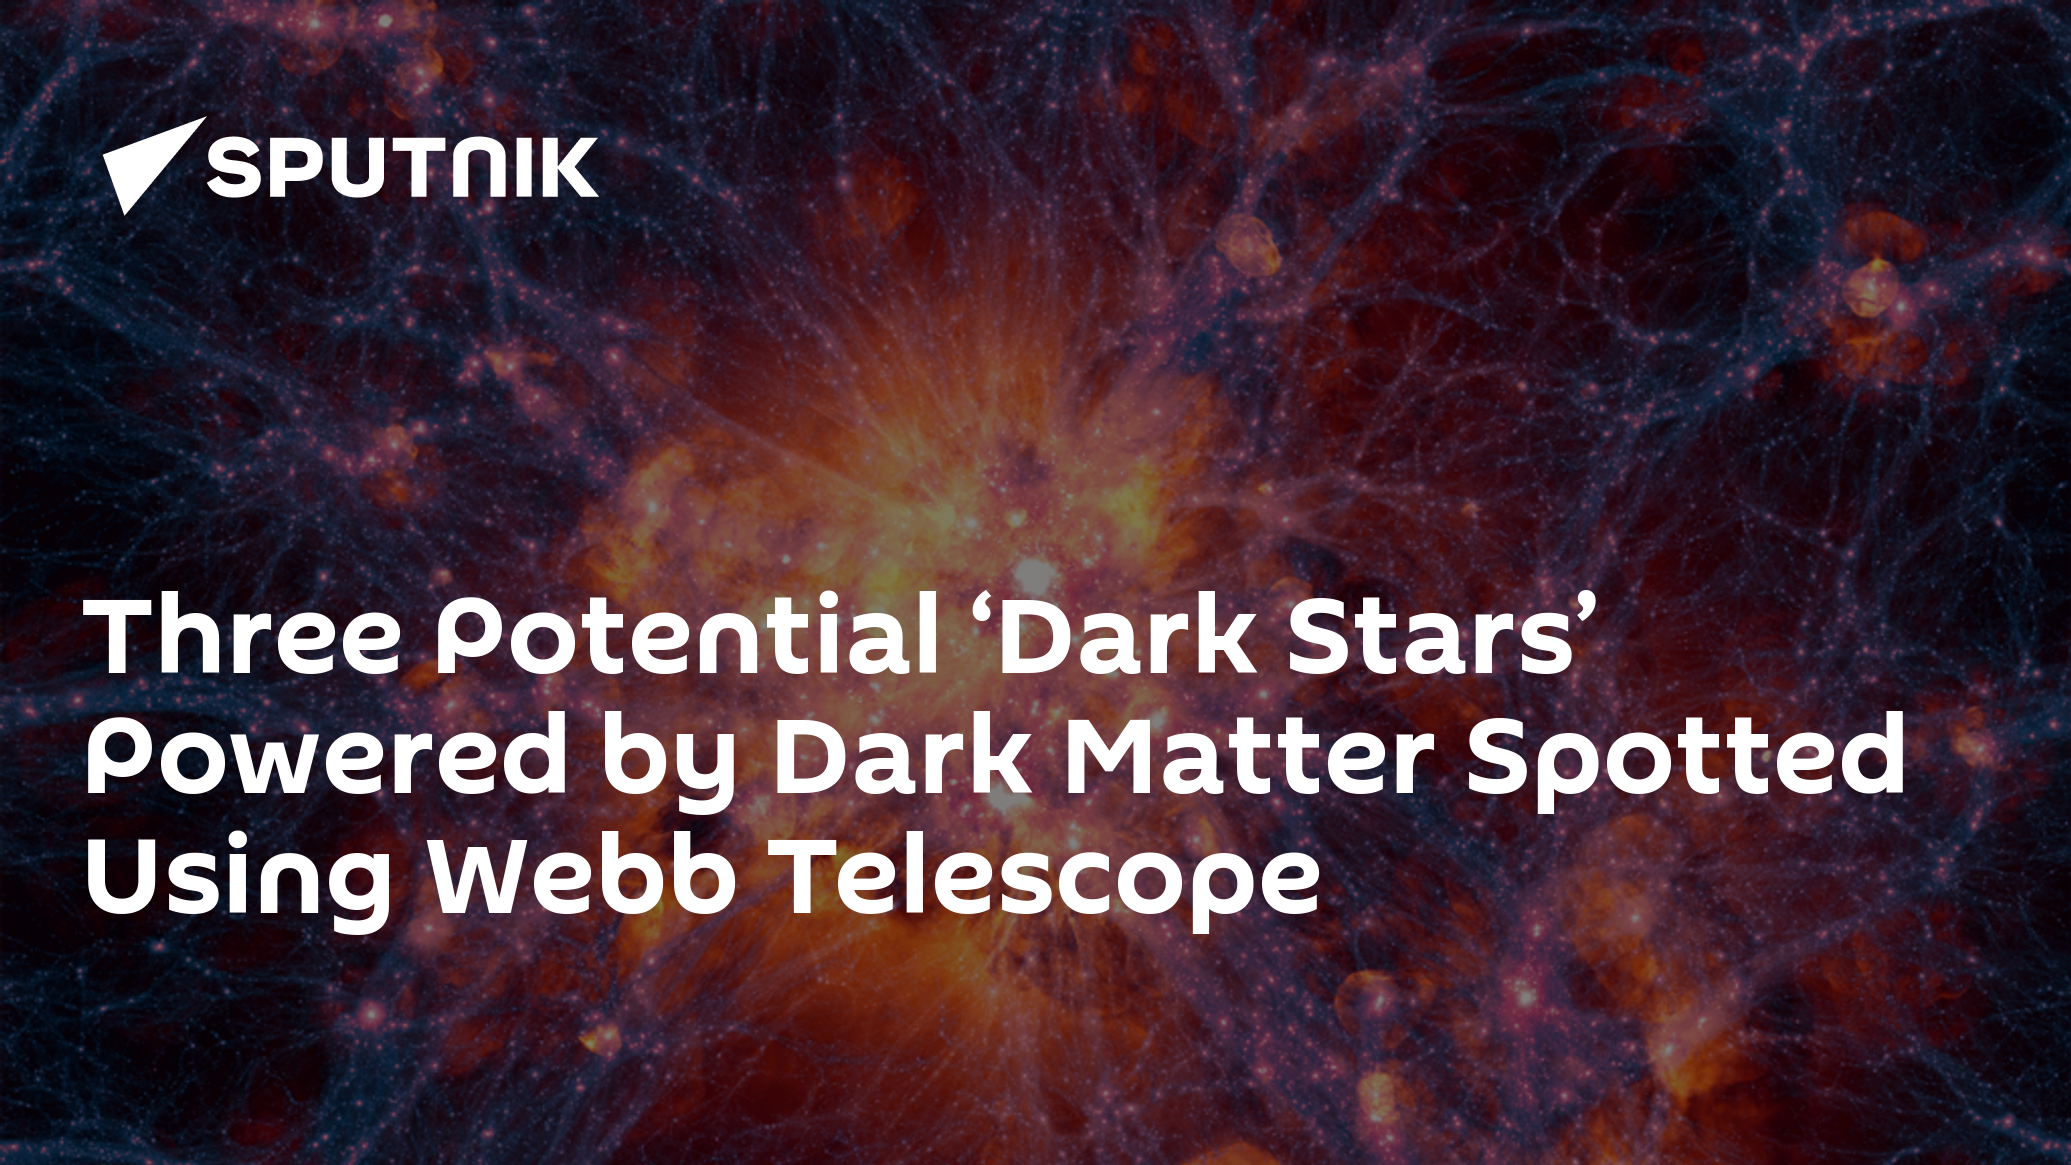 Dark stars: Scientists discover a new type of star powered by dark matter •